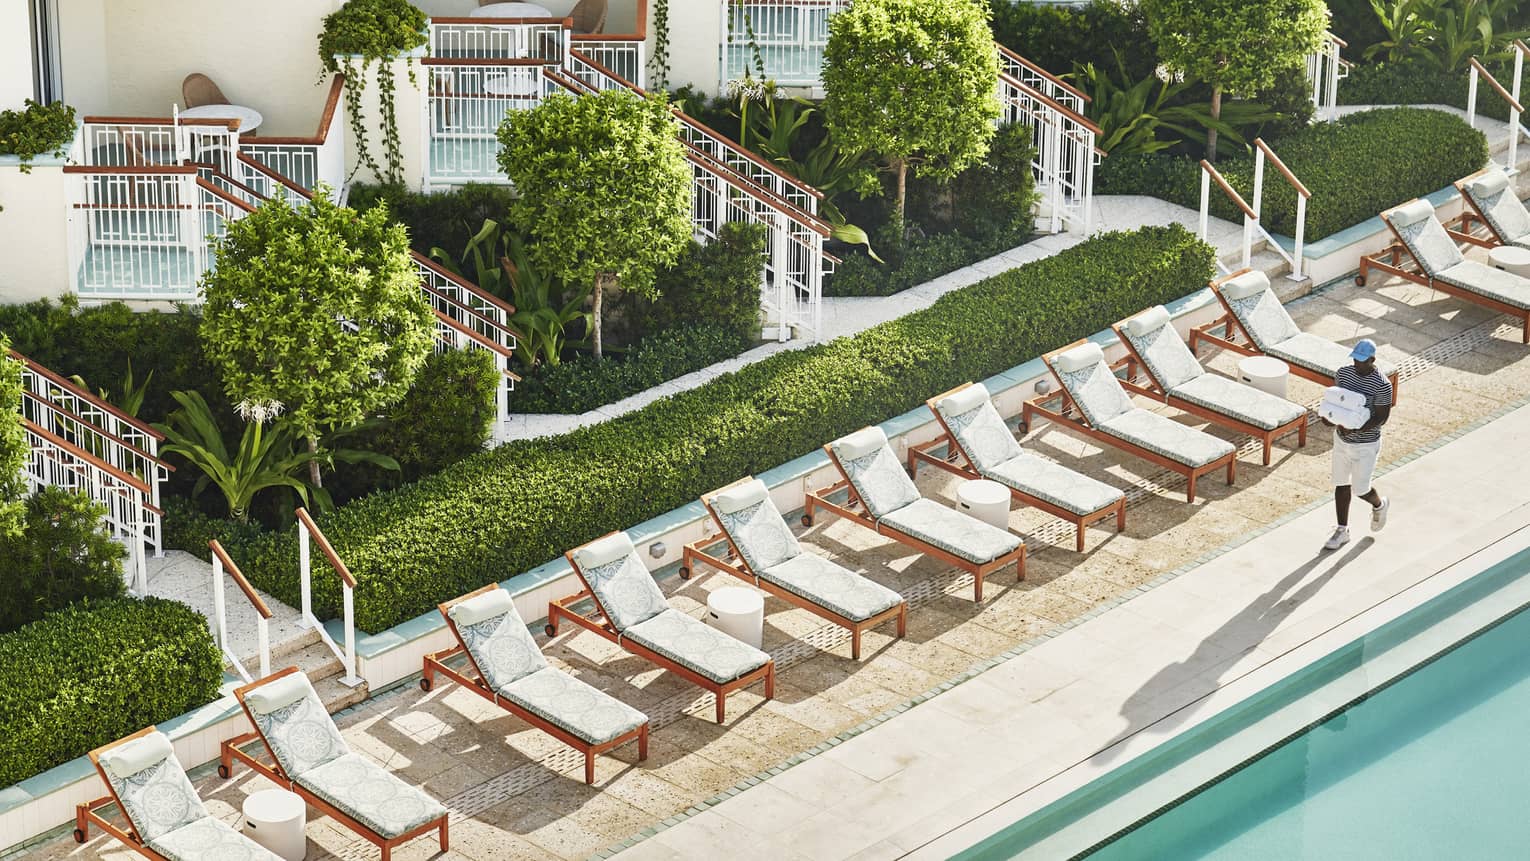 White lounge chairs next to an outdoor pool.